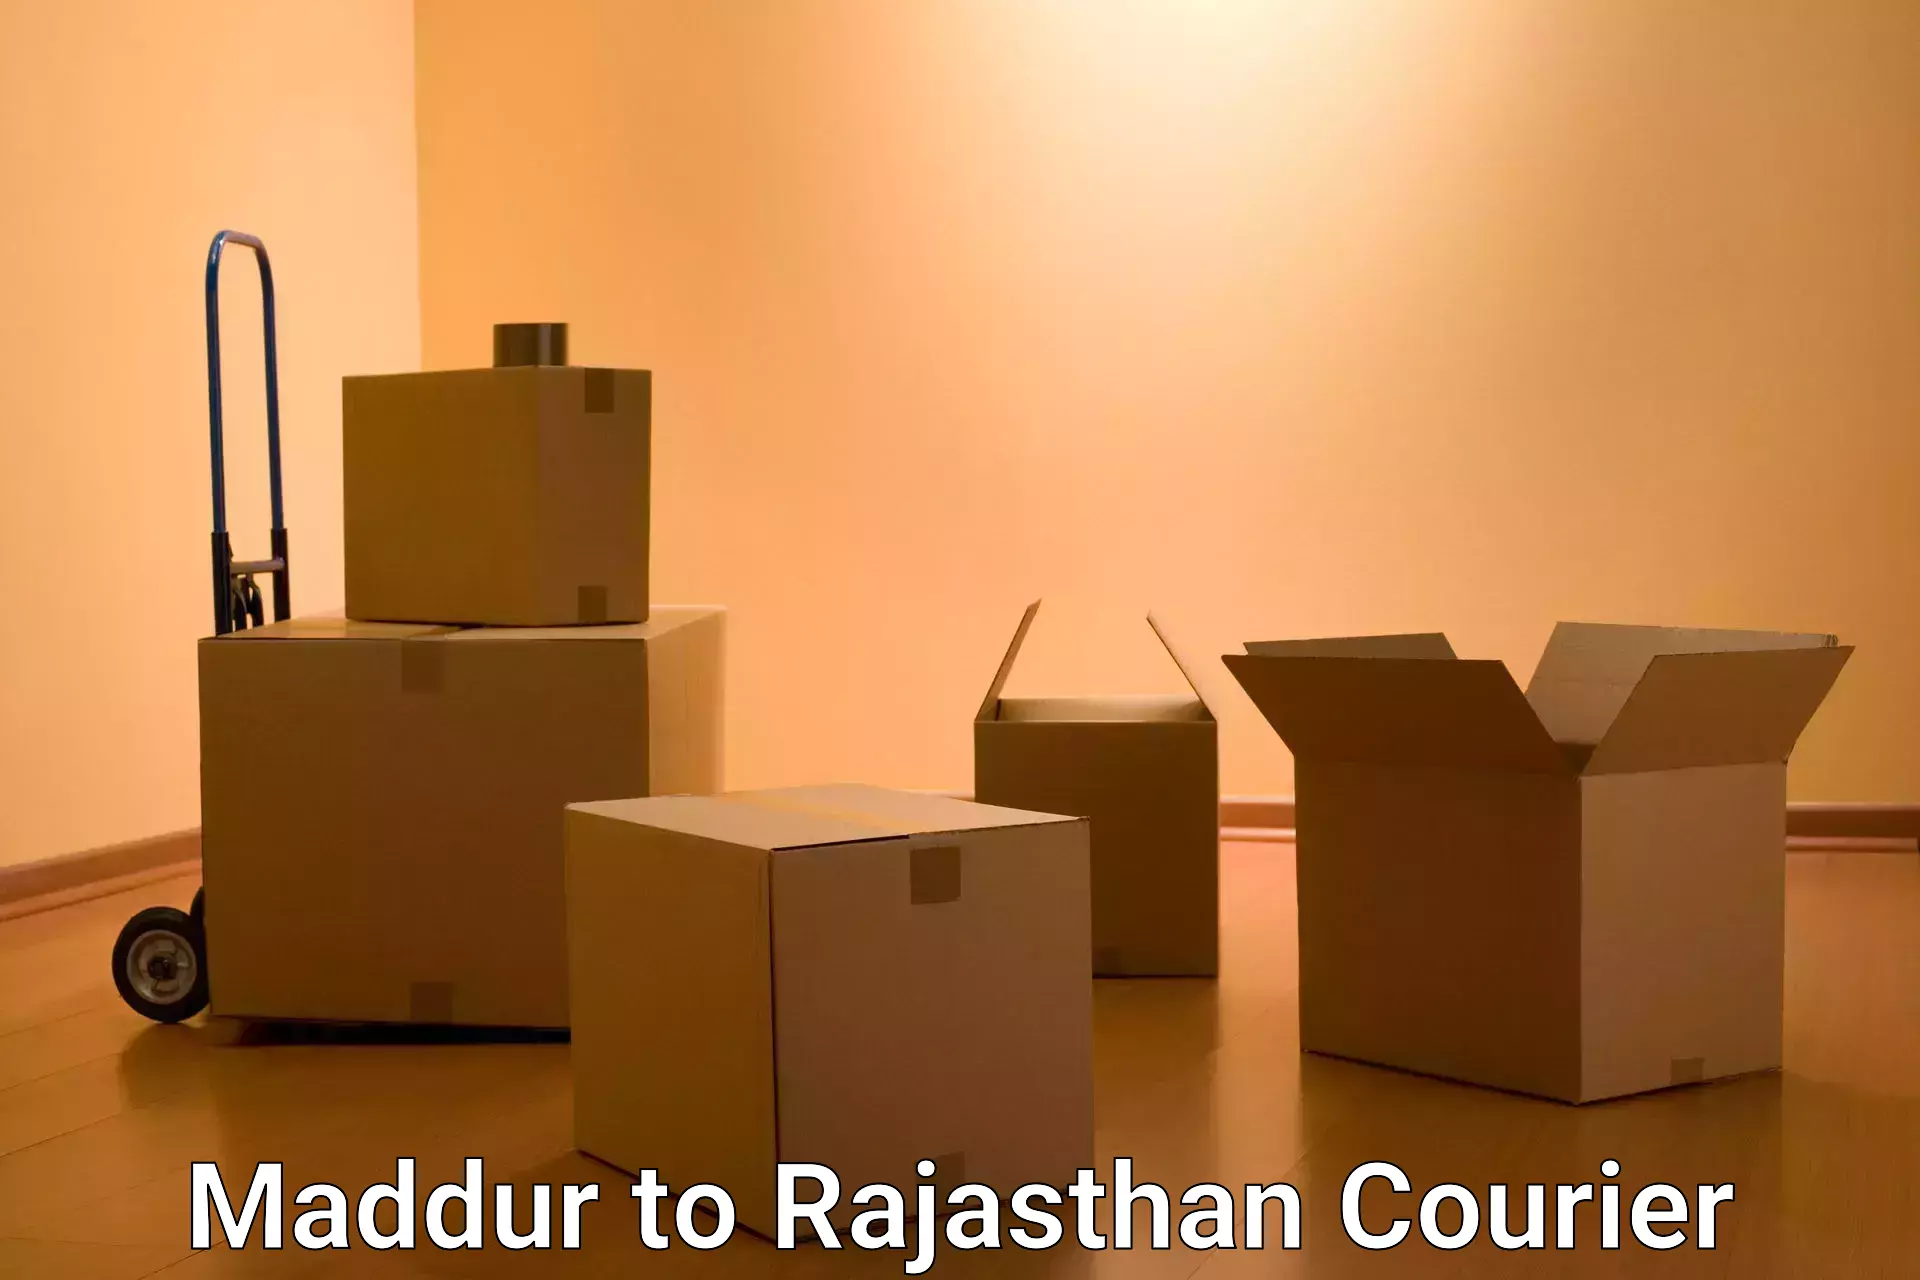 Business shipping needs Maddur to Rajasthan